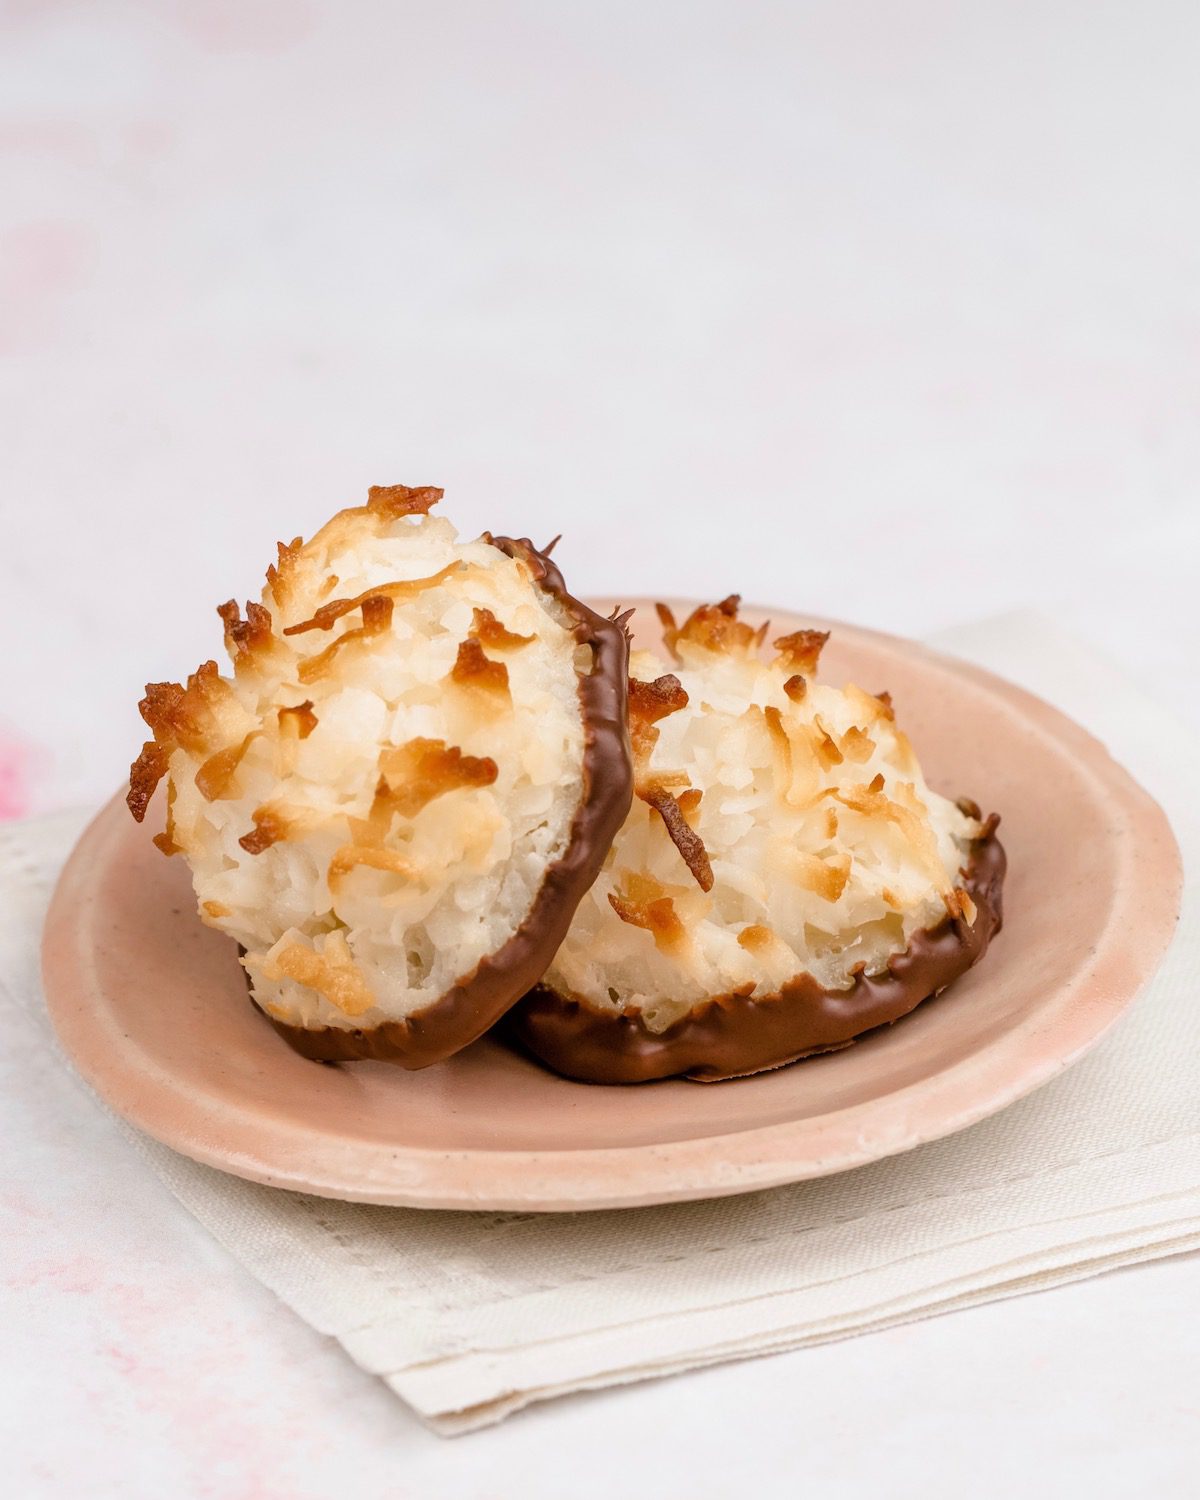 coconut macaroon cookies dipped in chocolate on pink plate